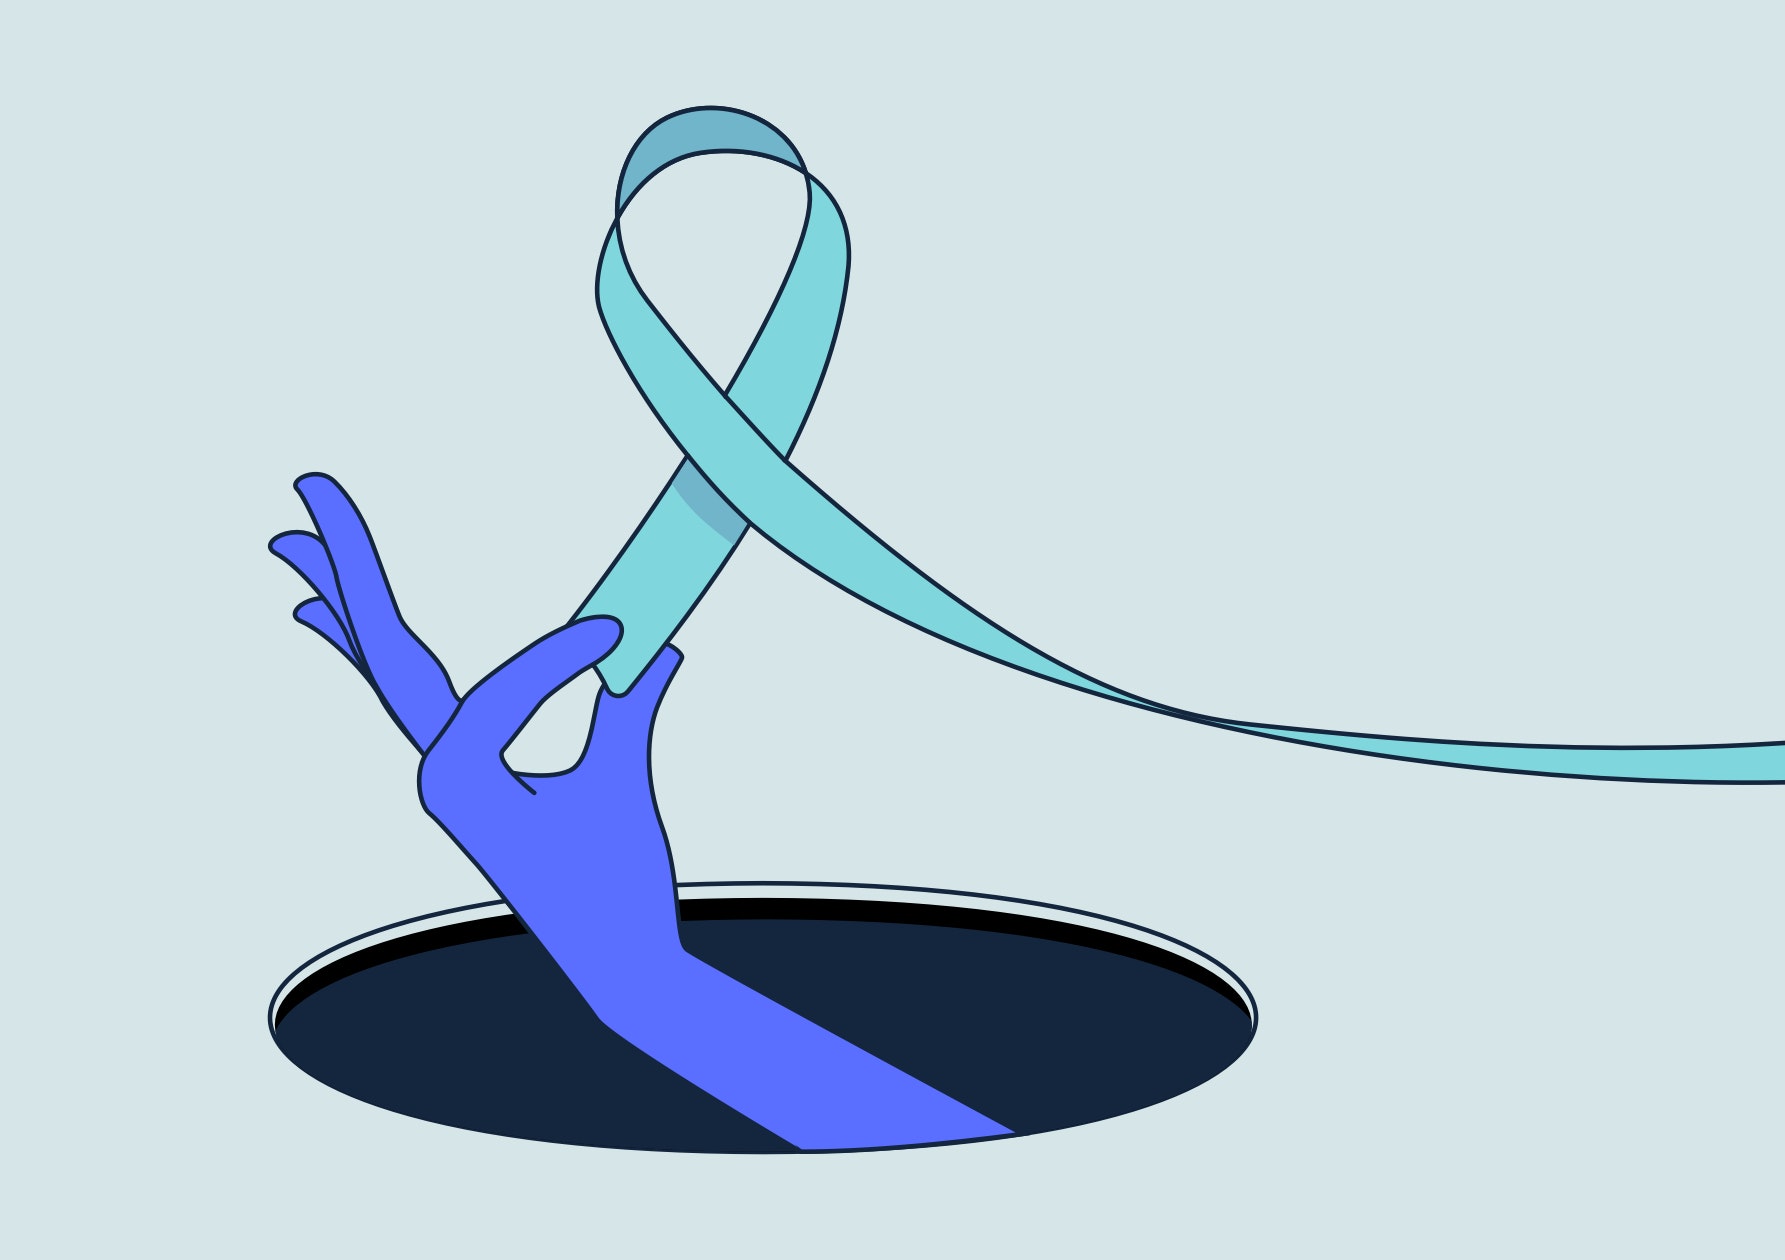  Ovarian cancer: how to reduce your risk and prevention